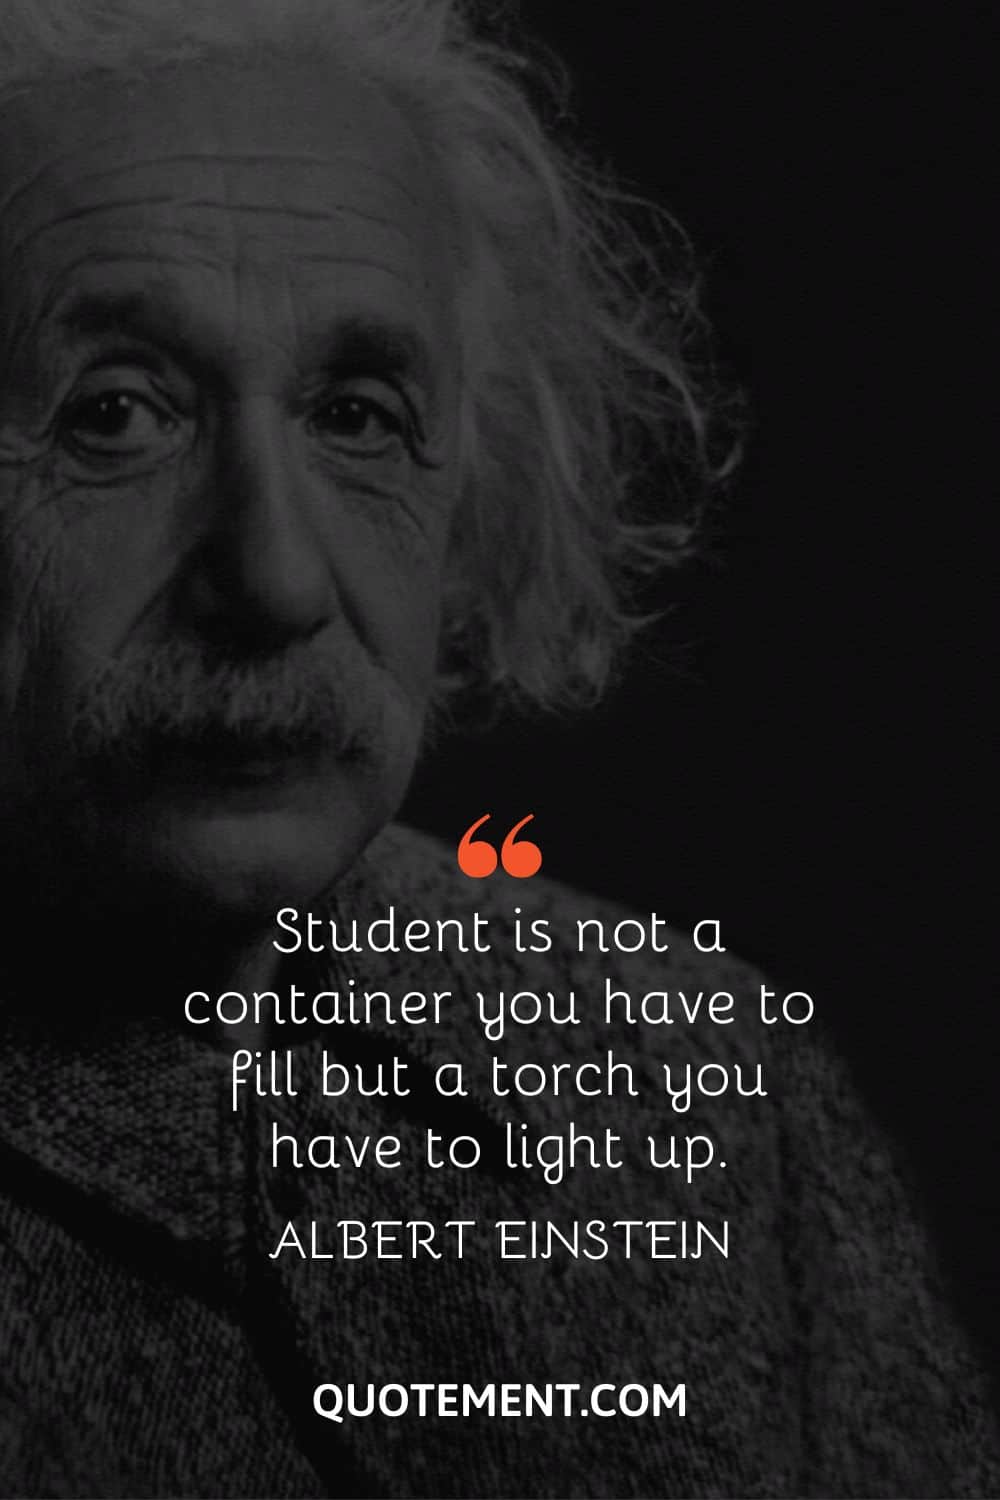 Student is not a container you have to fill but a torch you have to light up